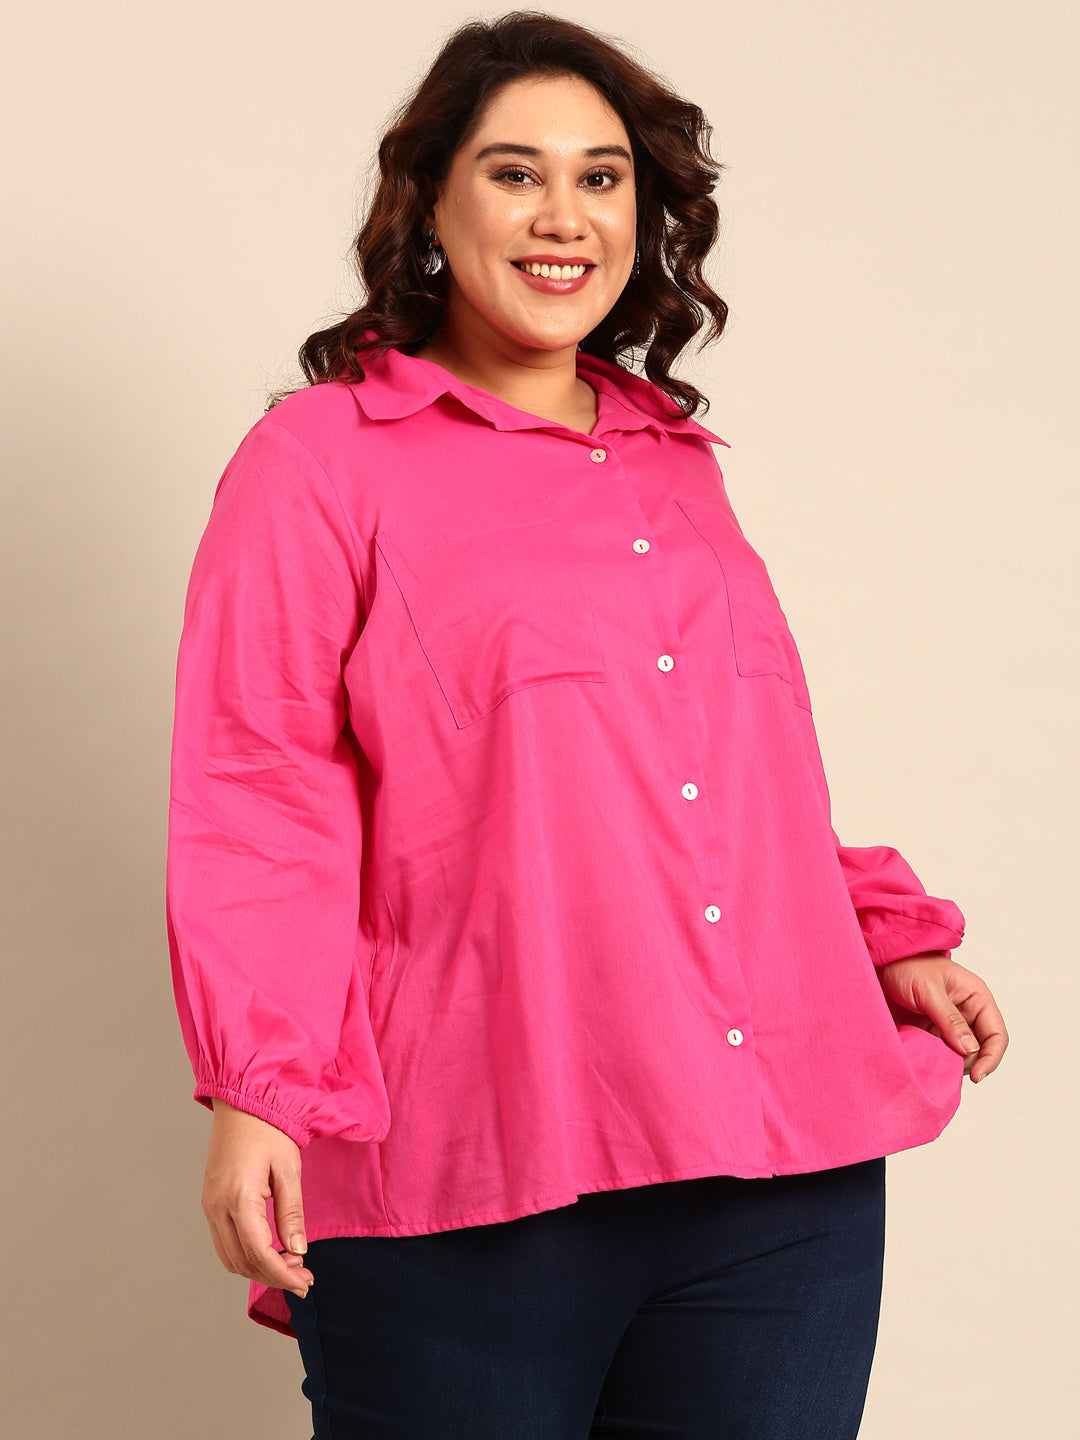 Pink Shirt With Big Sleeves